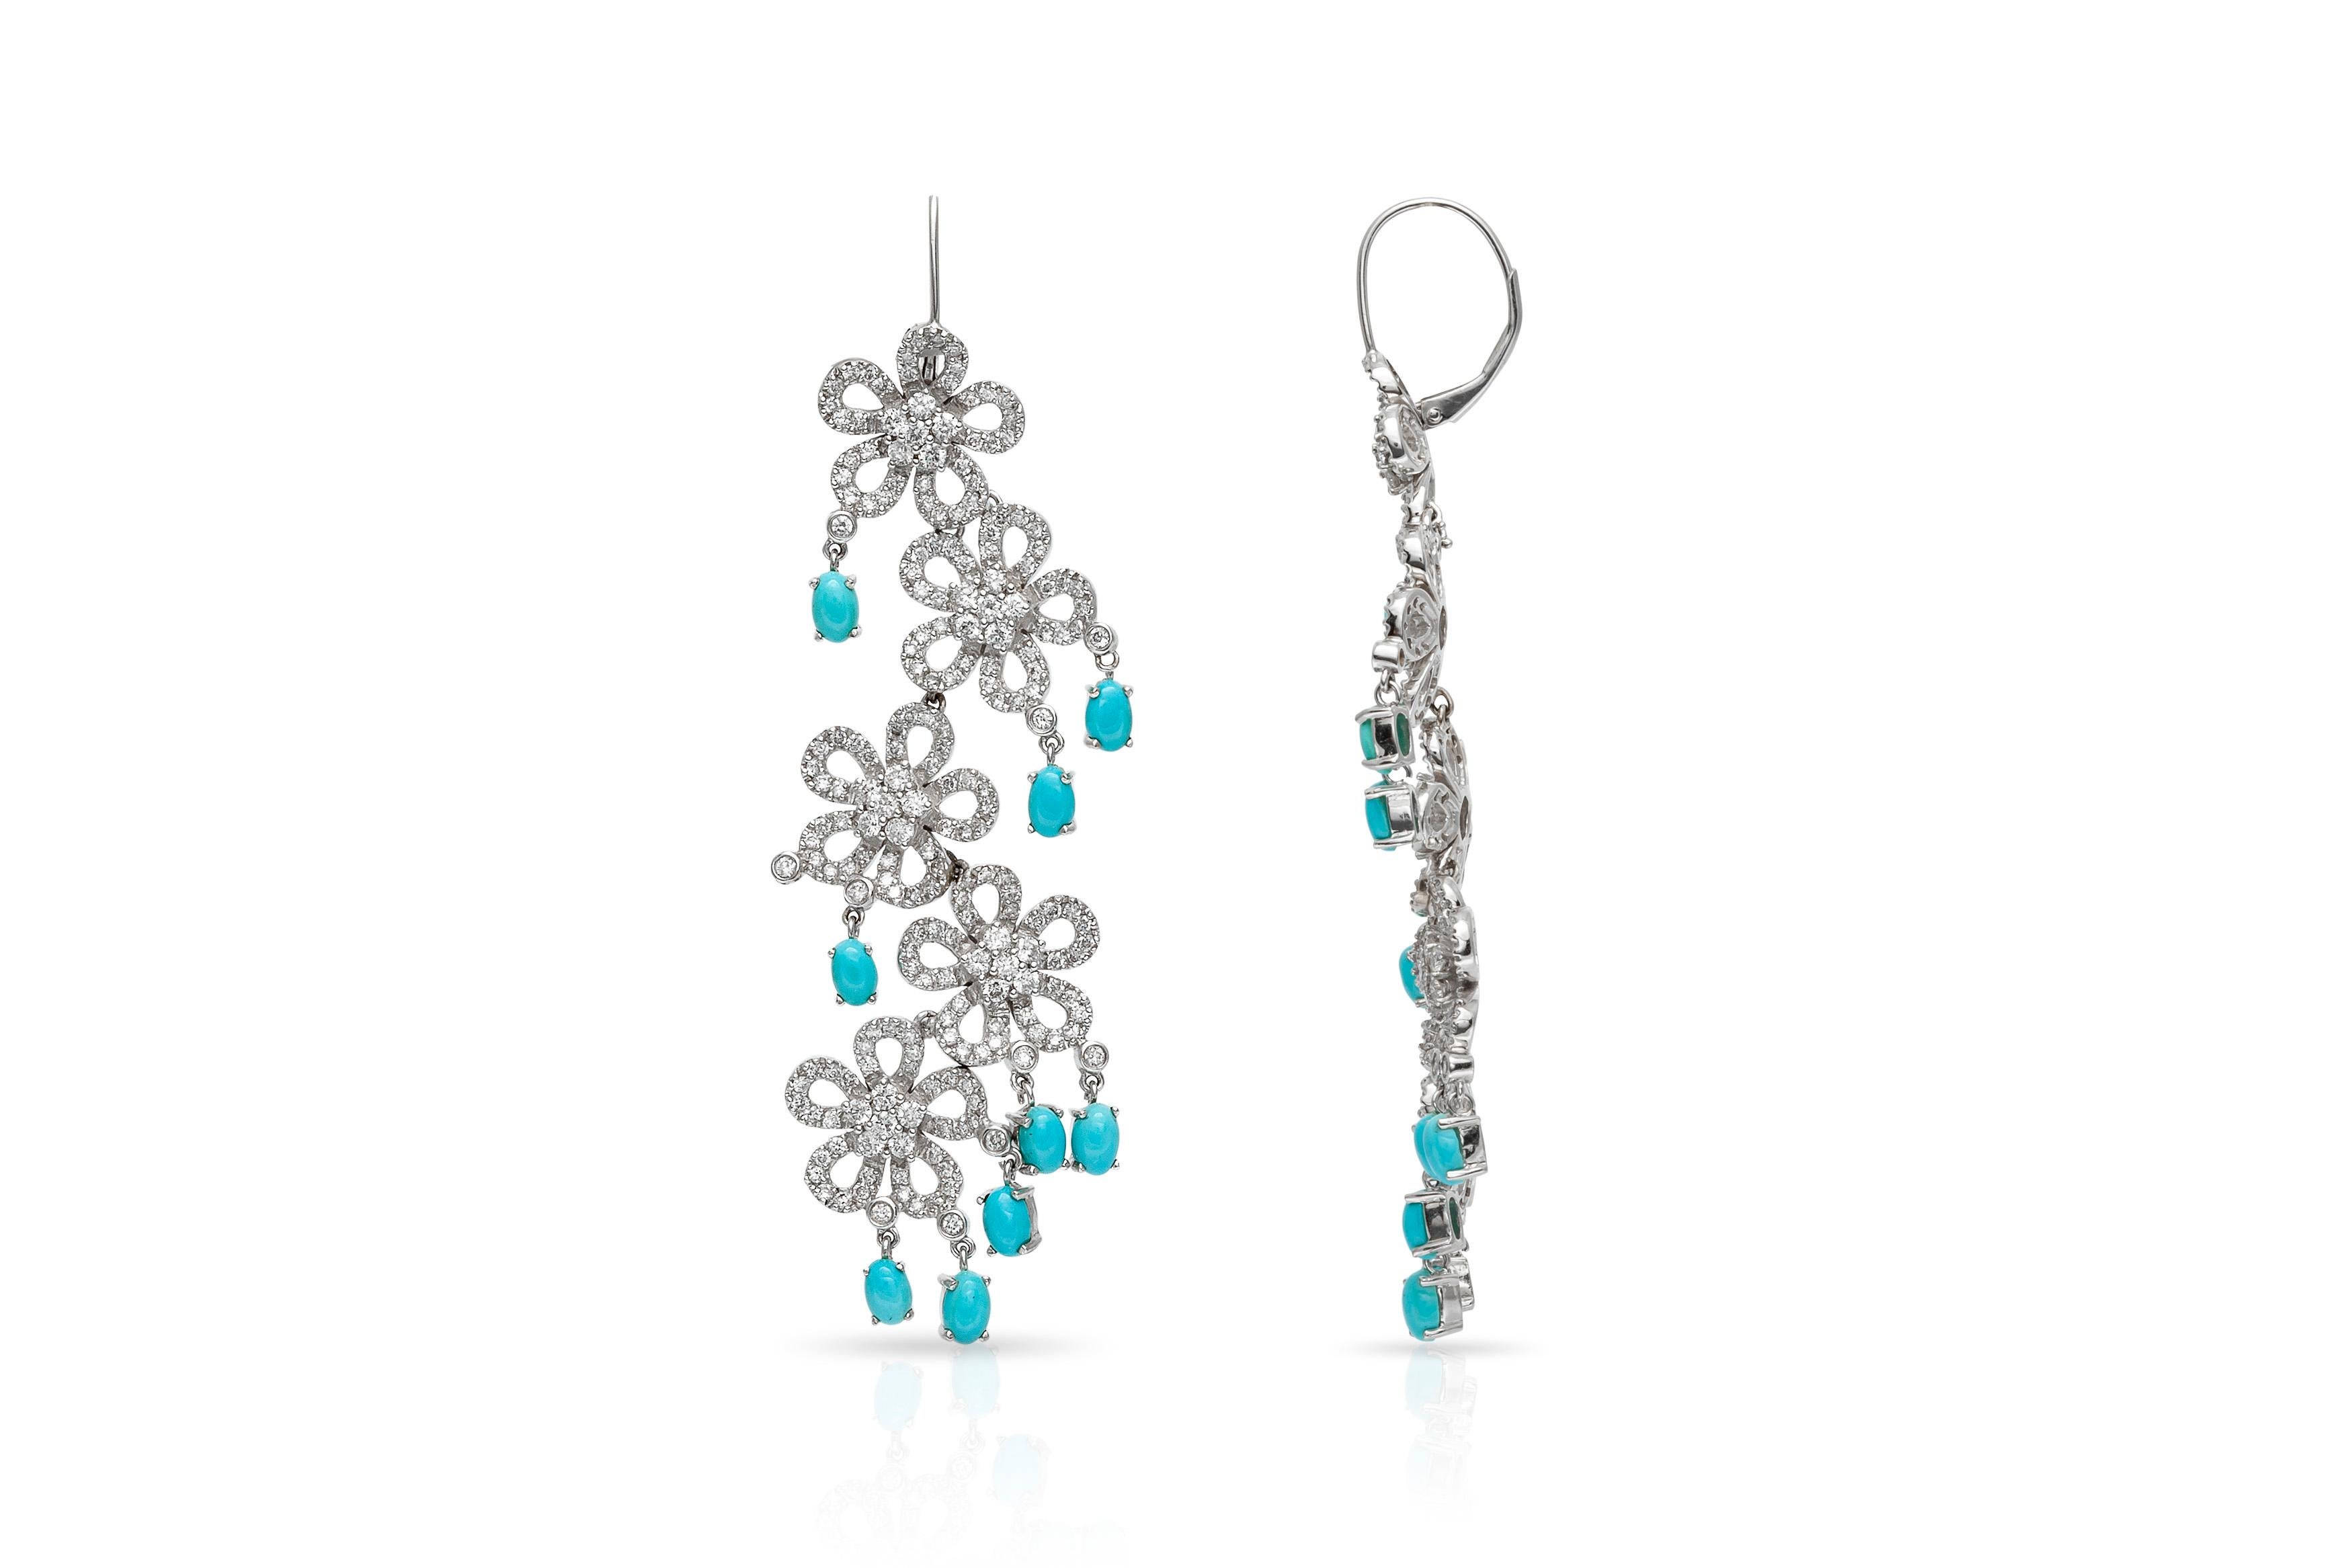 Five flowers per each earring finely crafted in 18k white gold with diamonds weighting approximately a total of 5.10 carats and turquoise weighting a total of 4.93 carats.
Circa 1980's.